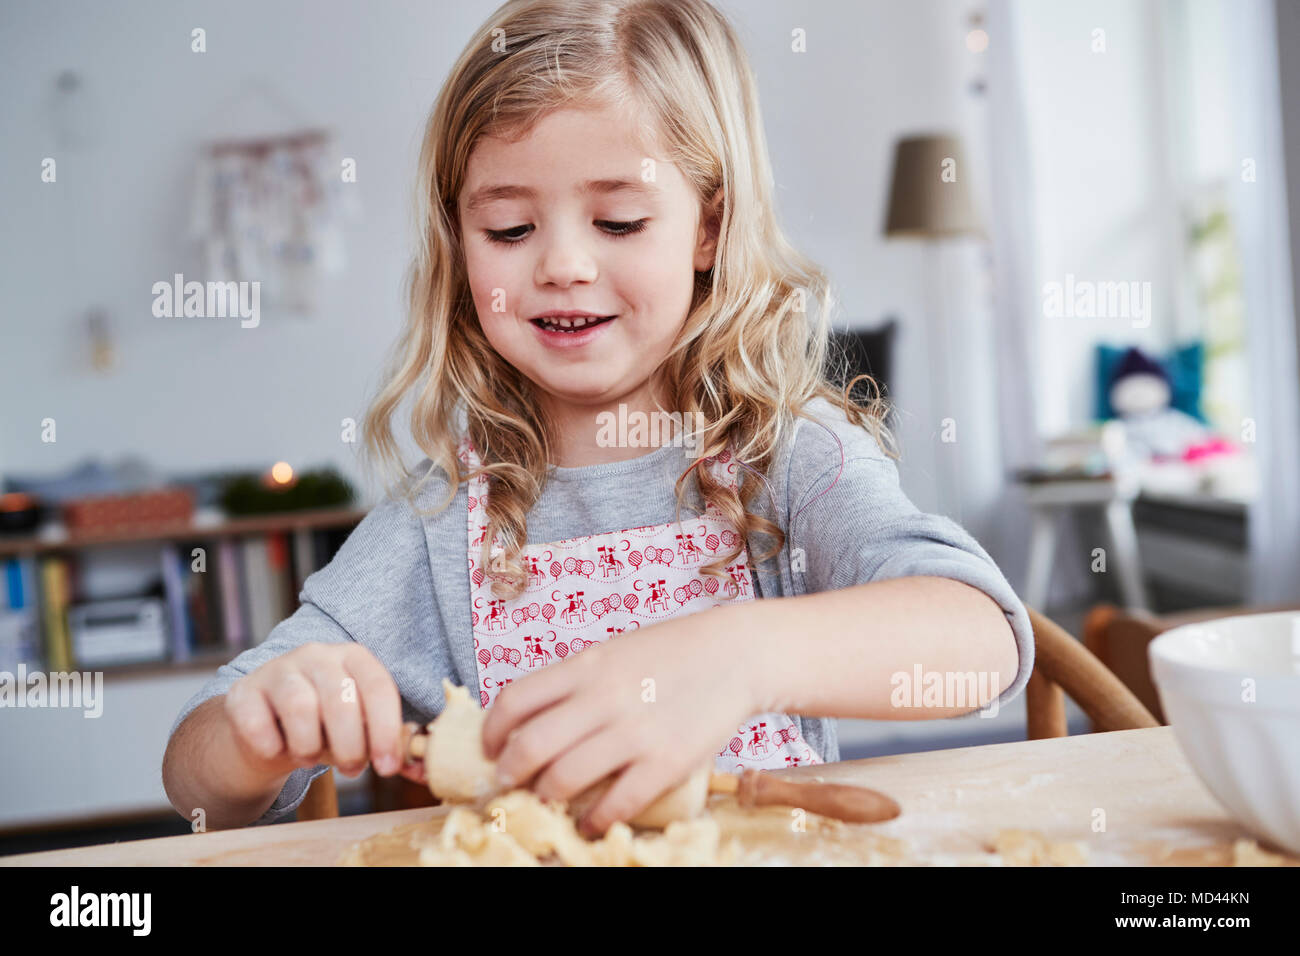 Young girl rolling out cookie dough, dough stuck to rolling pin Stock Photo